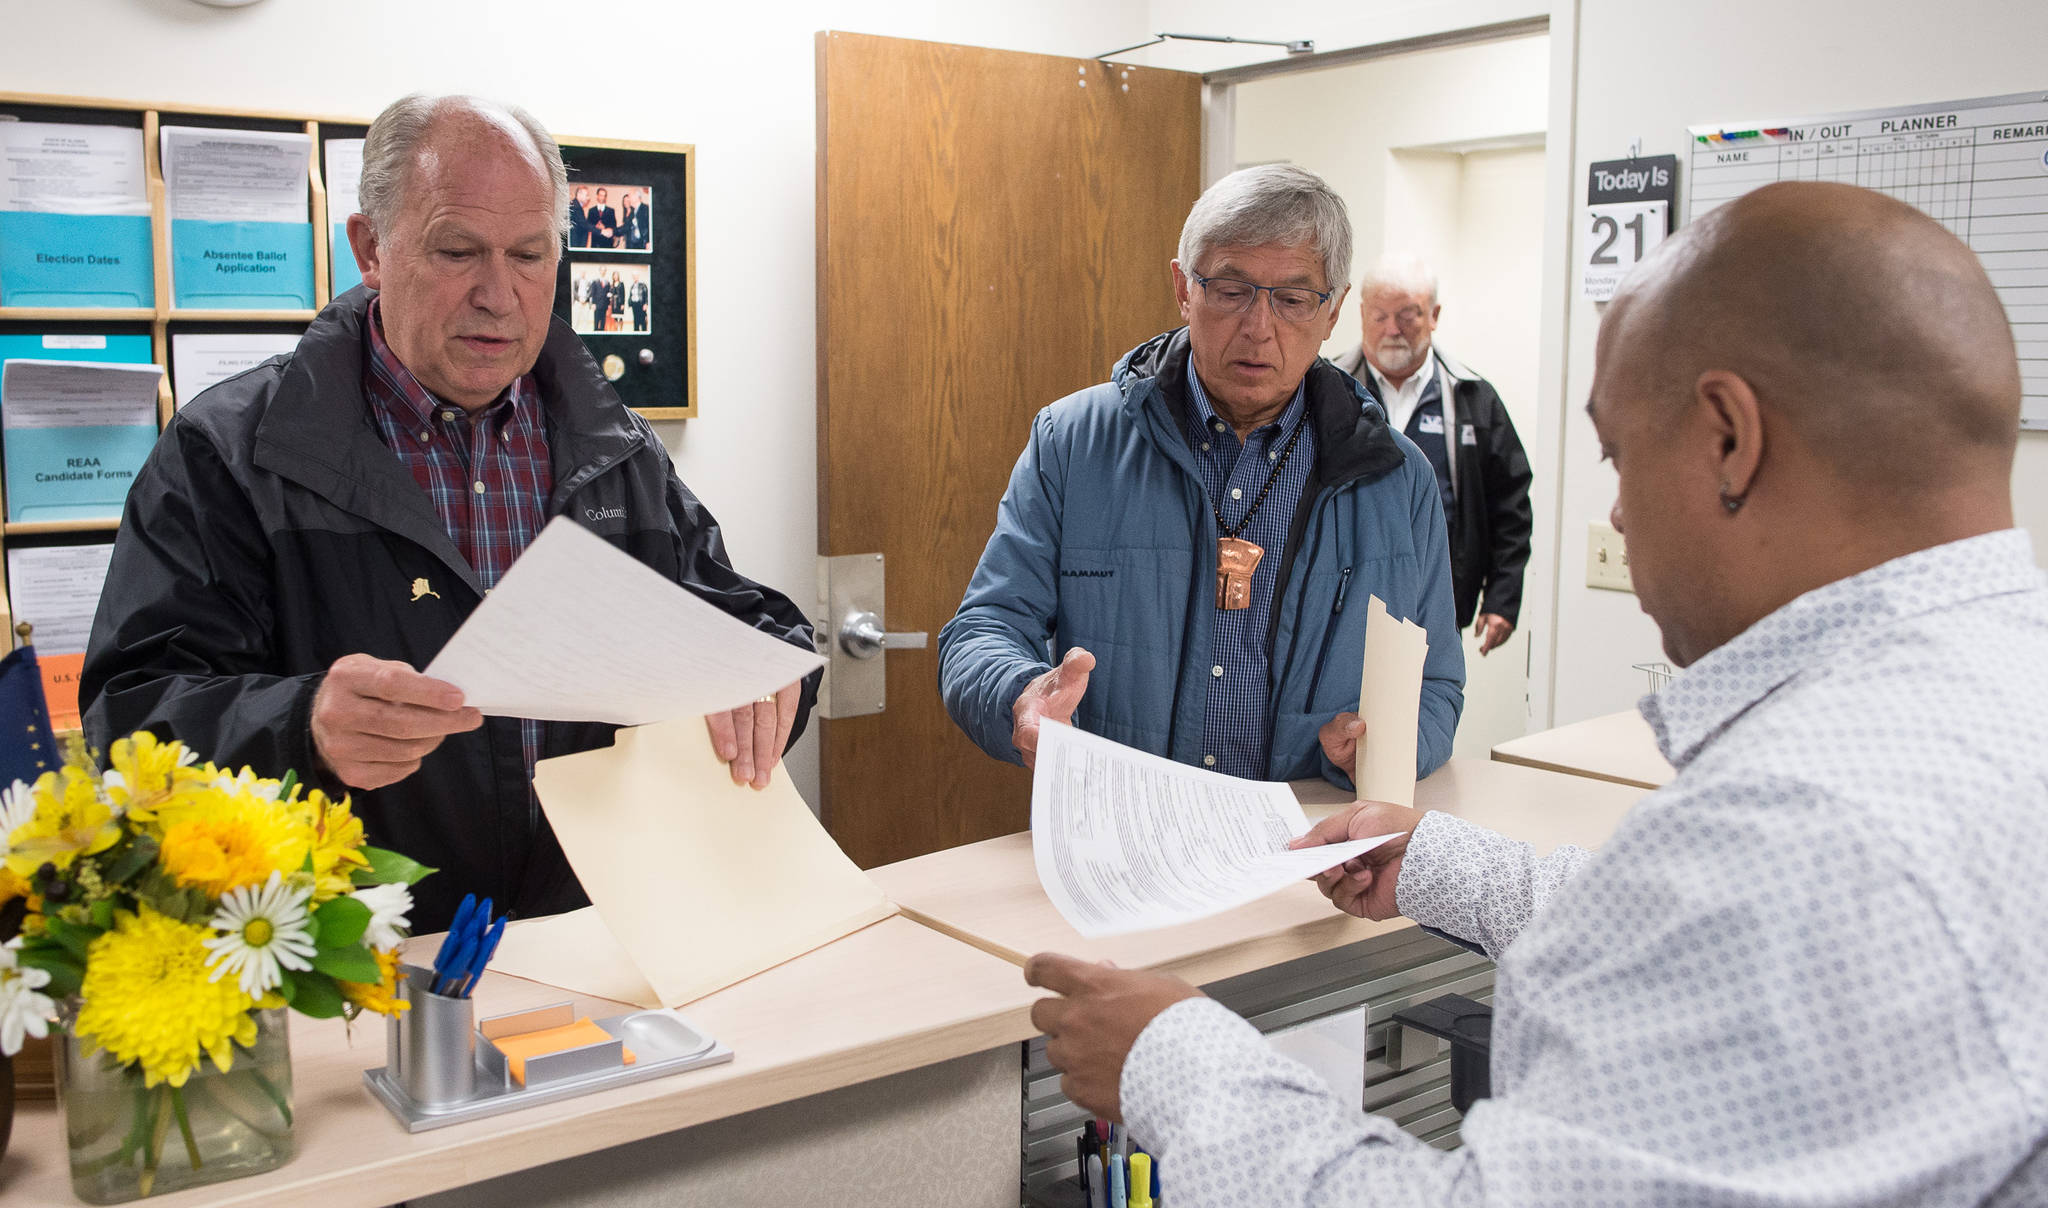 Gov. Bill Walker and Lt. Gov. Byron Mallott file for re-election at the state’s election office in Juneau on Monday, Aug. 21, 2017. (Michael Penn | Juneau Empire)